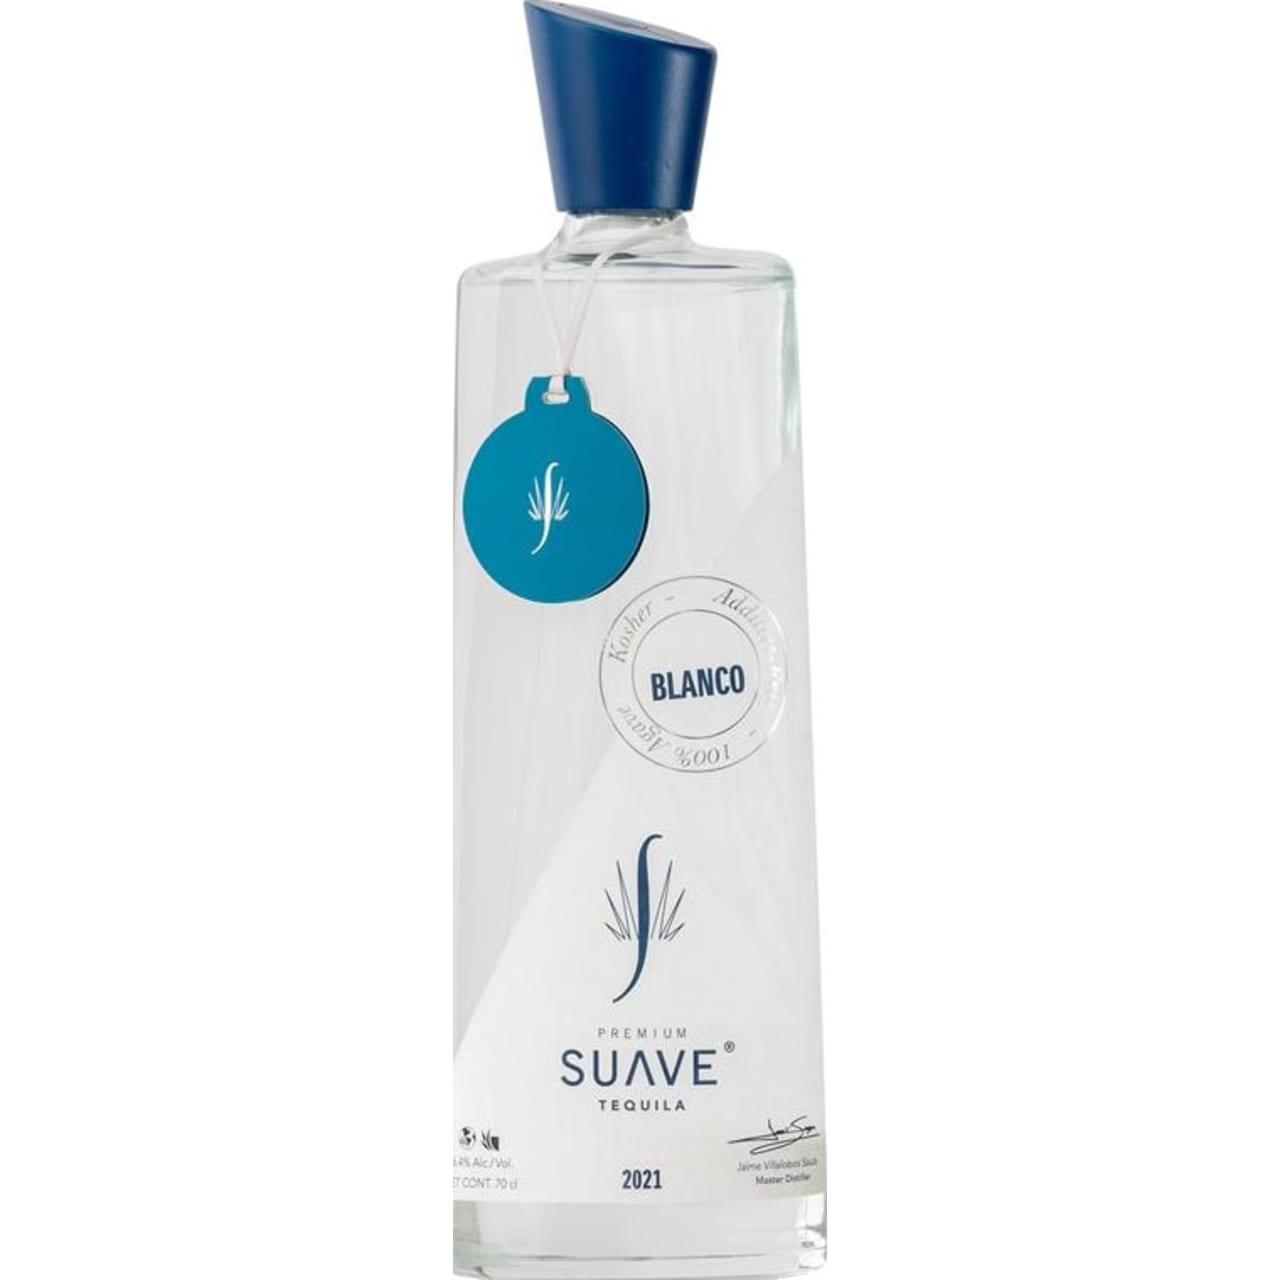 Product Image - Suave Blanco Tequila